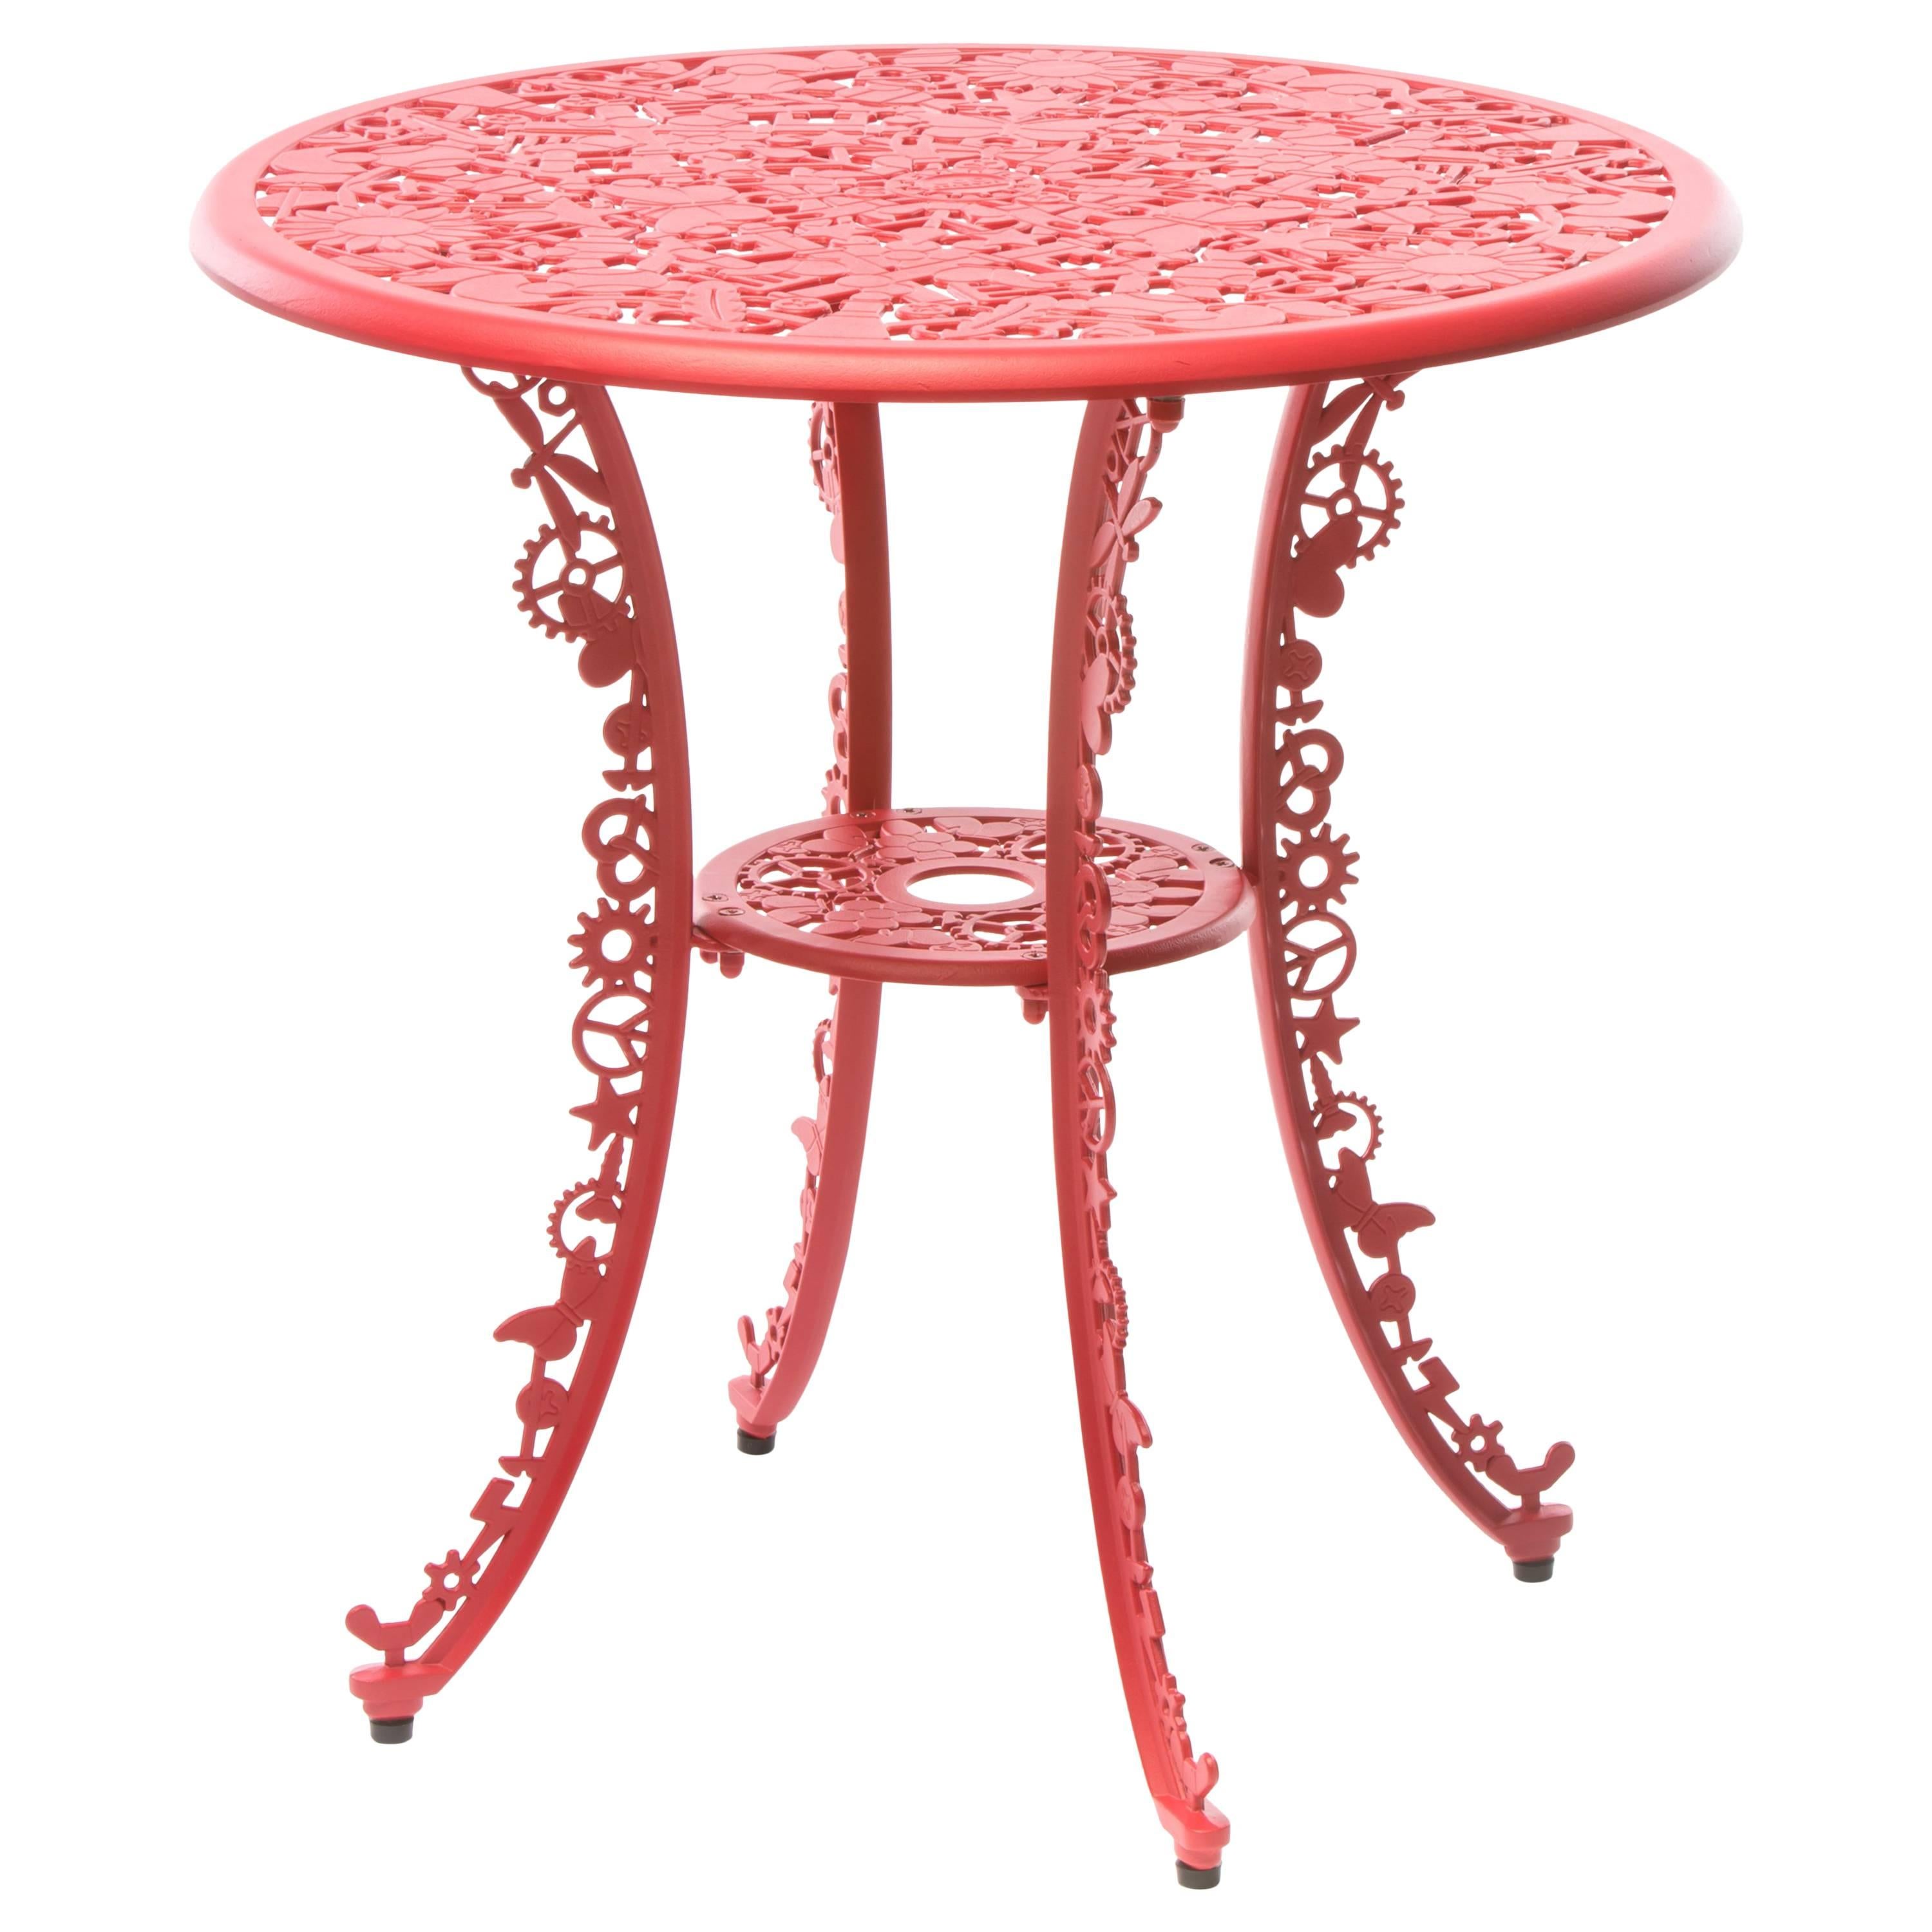 Aluminum Table "Industry Garden Furniture" by Seletti, Red